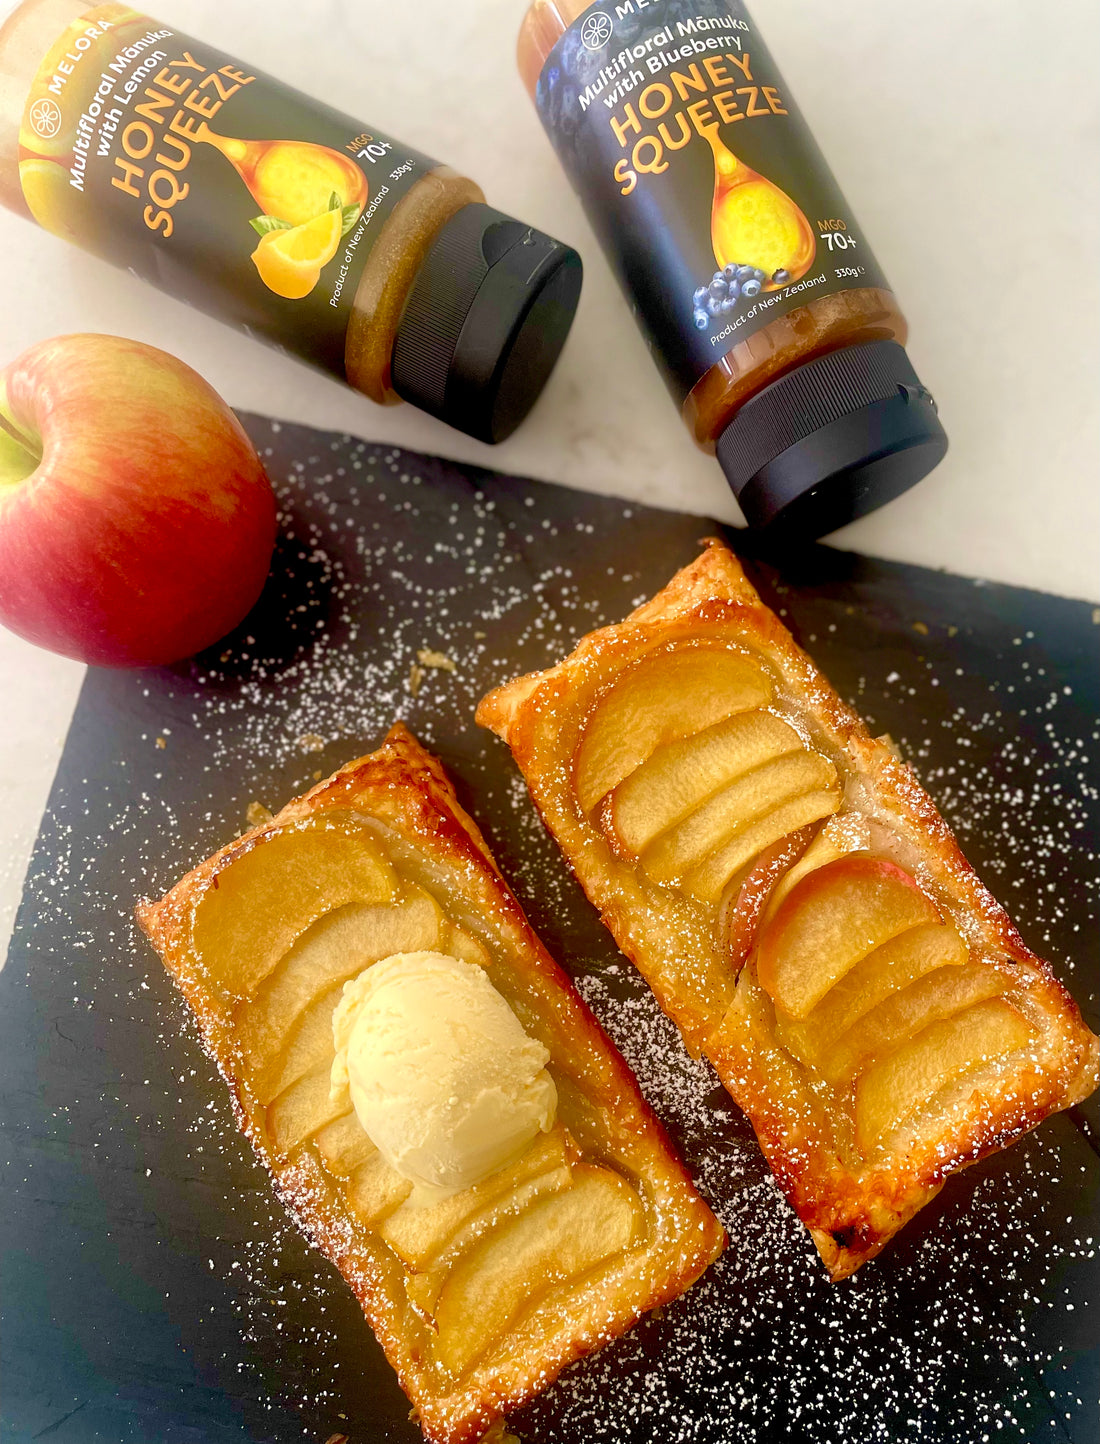 Embrace the Hot Weather with these Delicious Upside-Down Apple Puff Pastries with Manuka Honey!